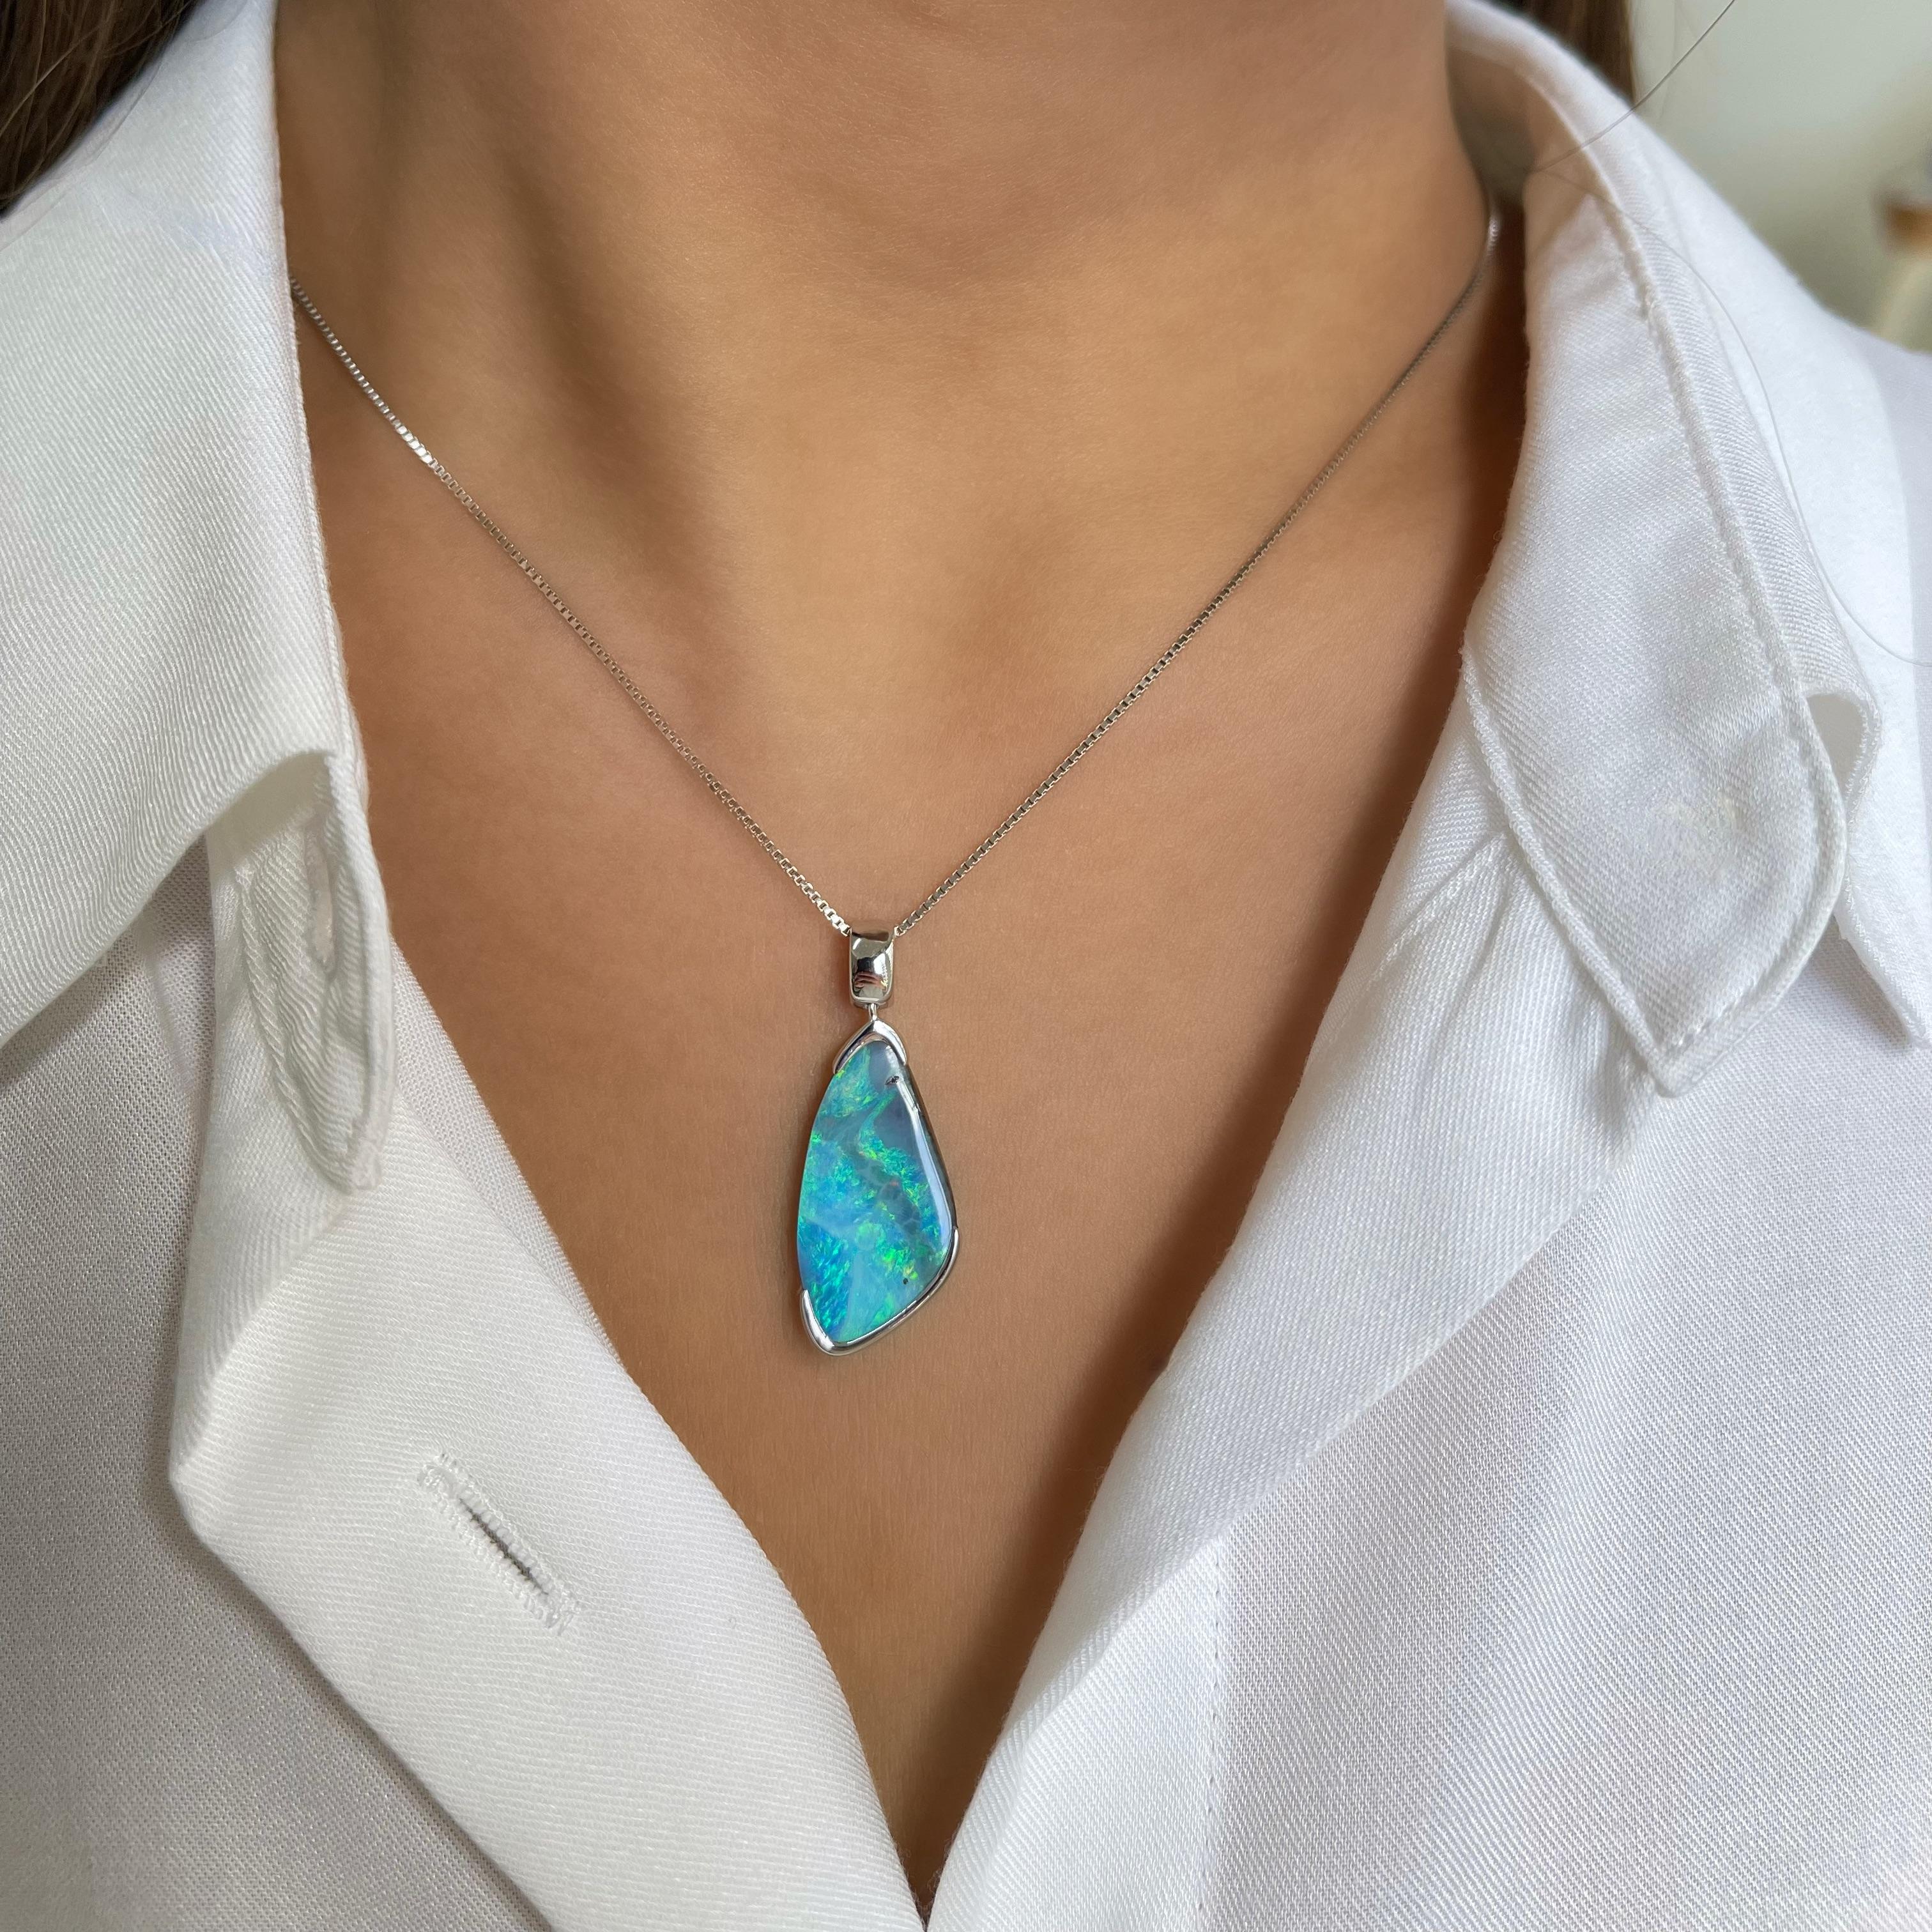 ‘Marissa’ opal pendant features a stylish boulder opal (2.96ct) ethically sourced from Winton opal mines in Australia, bound to inspire awe and admiration. Masterfully set in our elegant 18 karats white gold, the intriguing turquoise and green opal